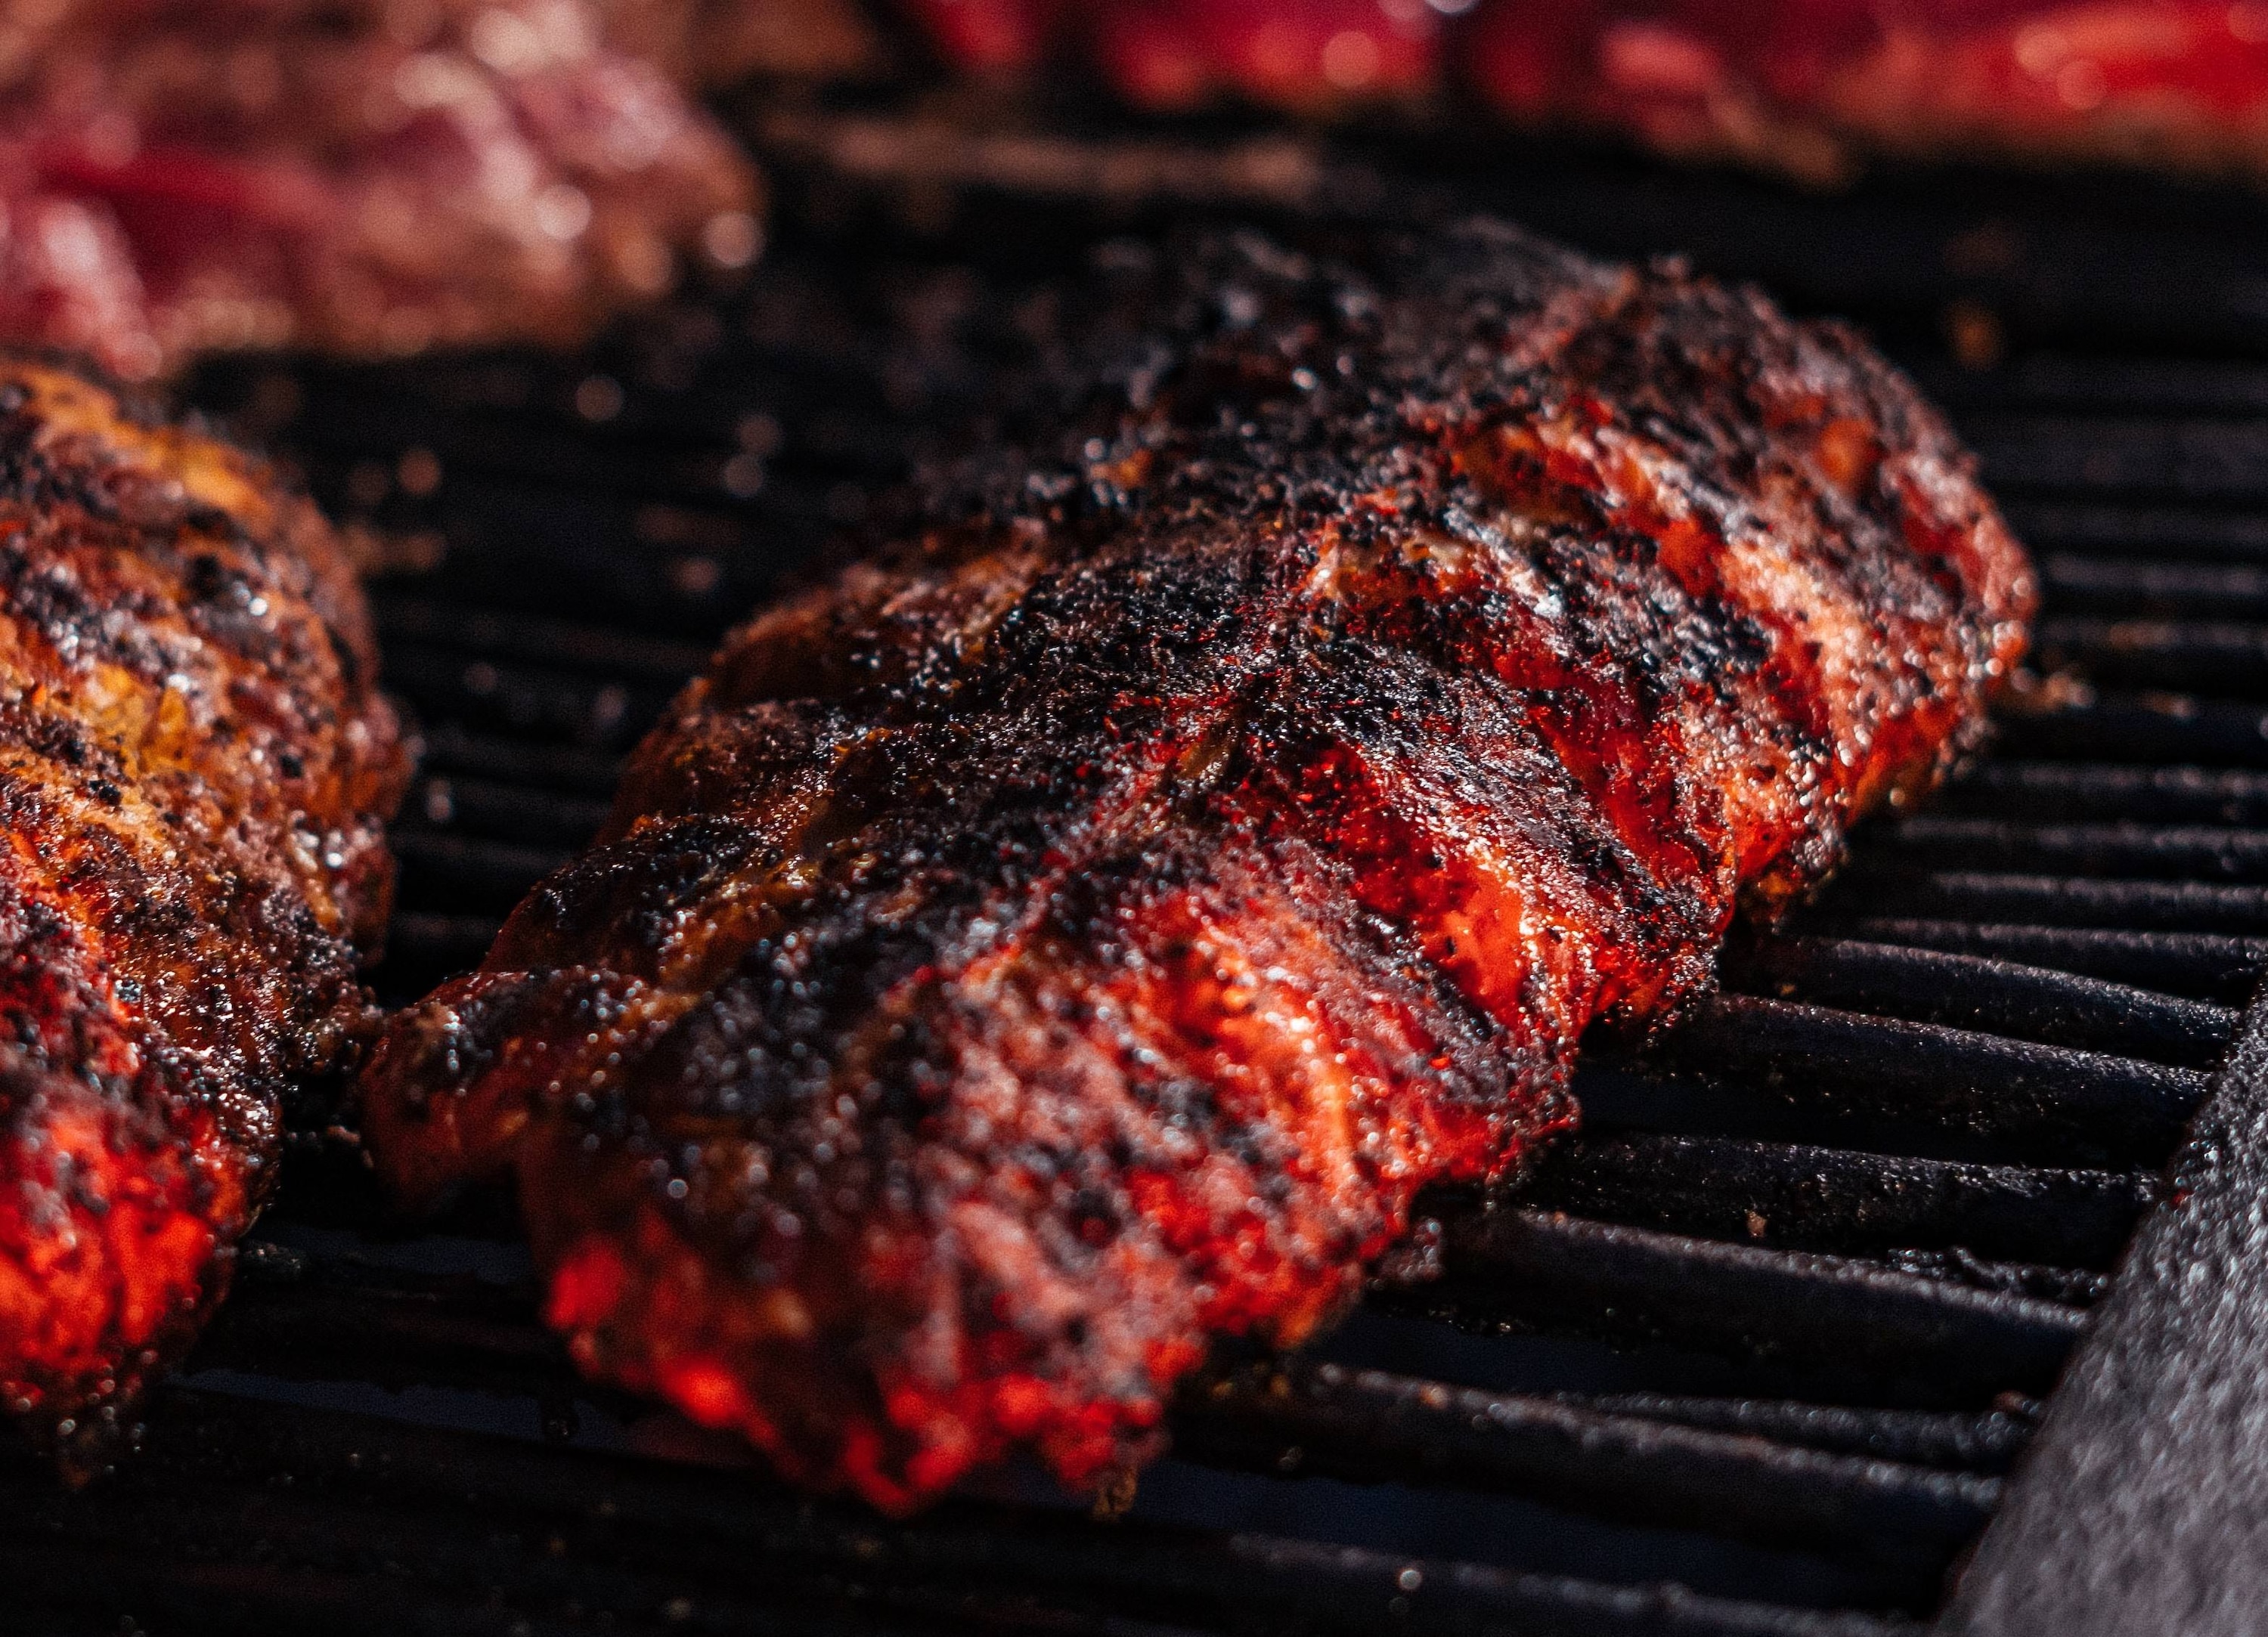 Fire Up The Grill and Finally Learn How To Cook Baby Back Ribs